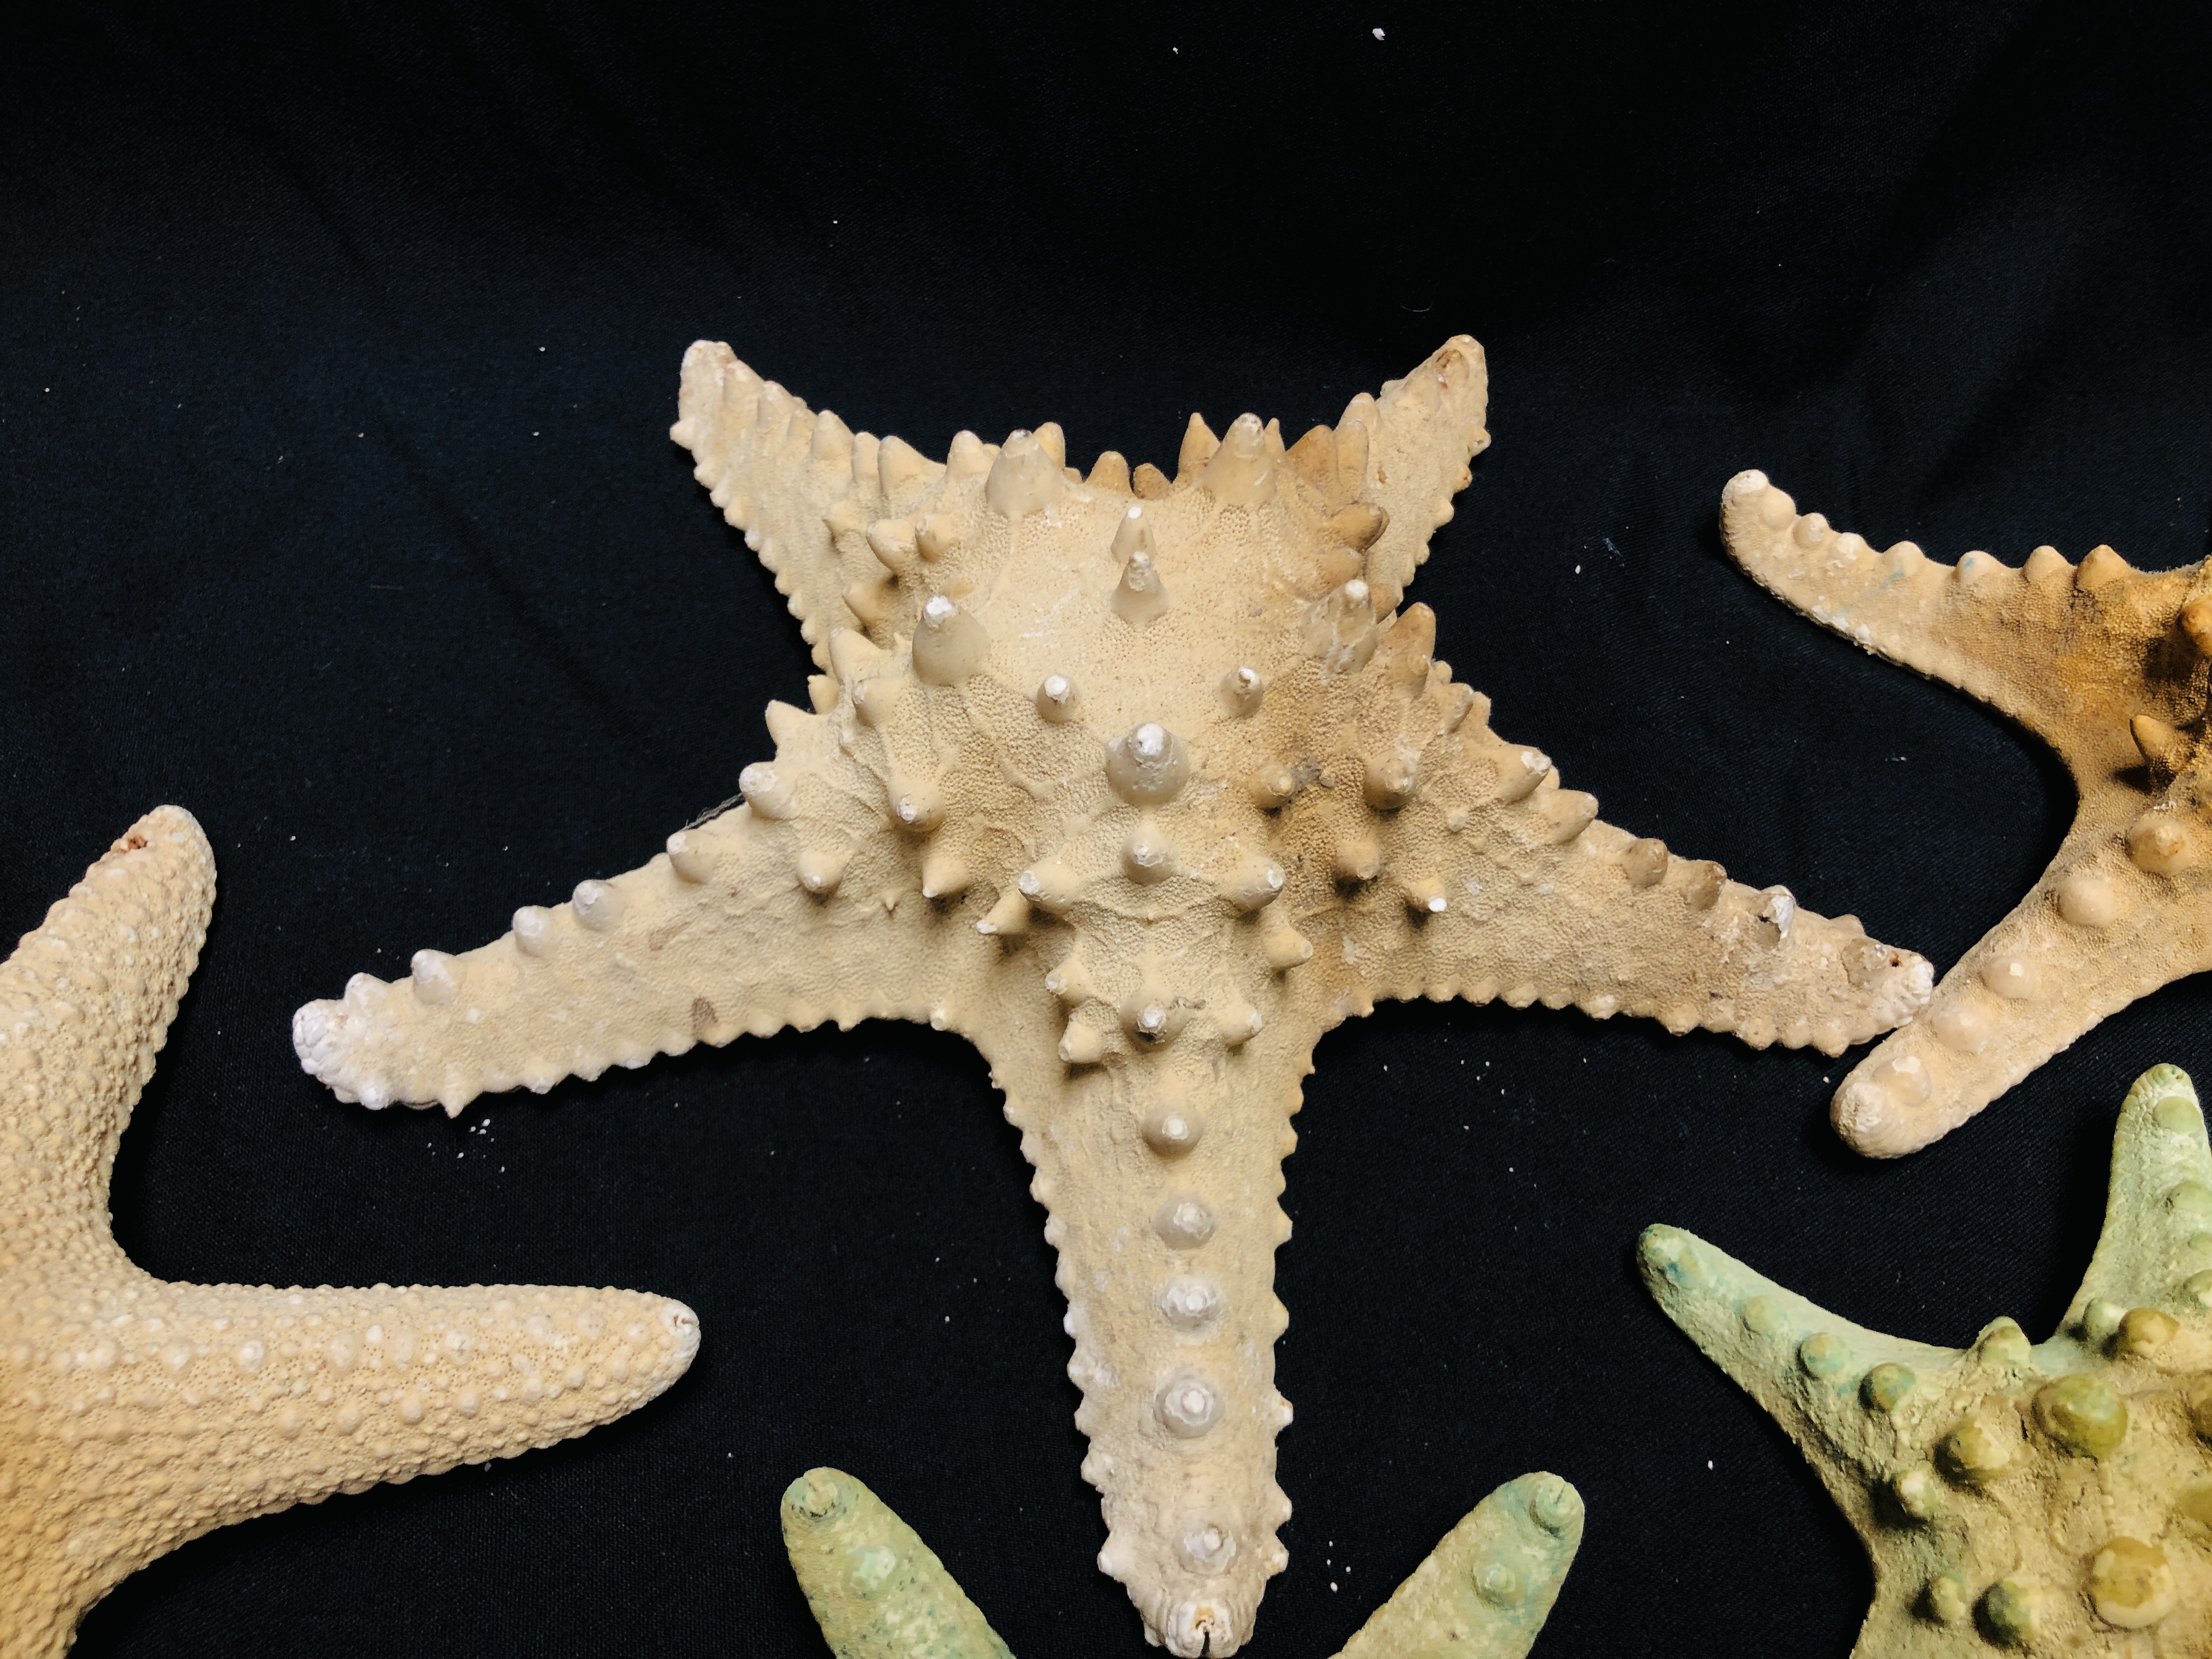 A GROUP OF 5 STARFISH, VARIOUS SIZES AND SPECIES. - Image 4 of 5